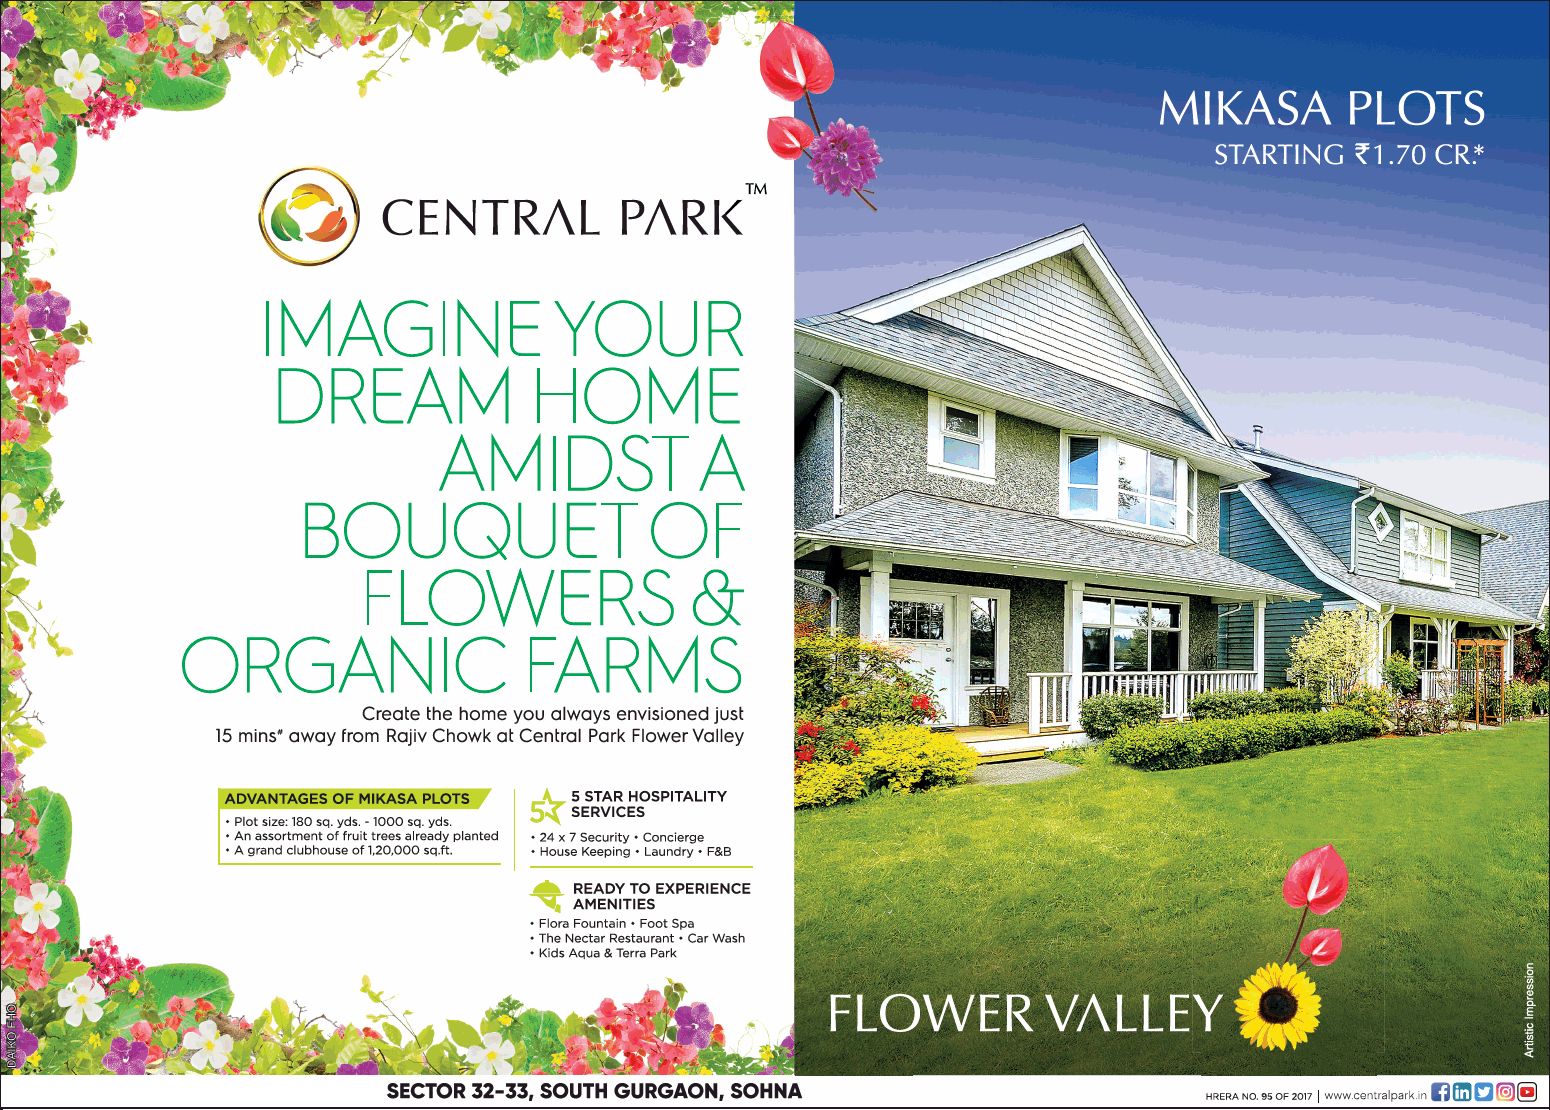 Ready to experience amenities at Central Park Flower Valley in Gurgaon Update